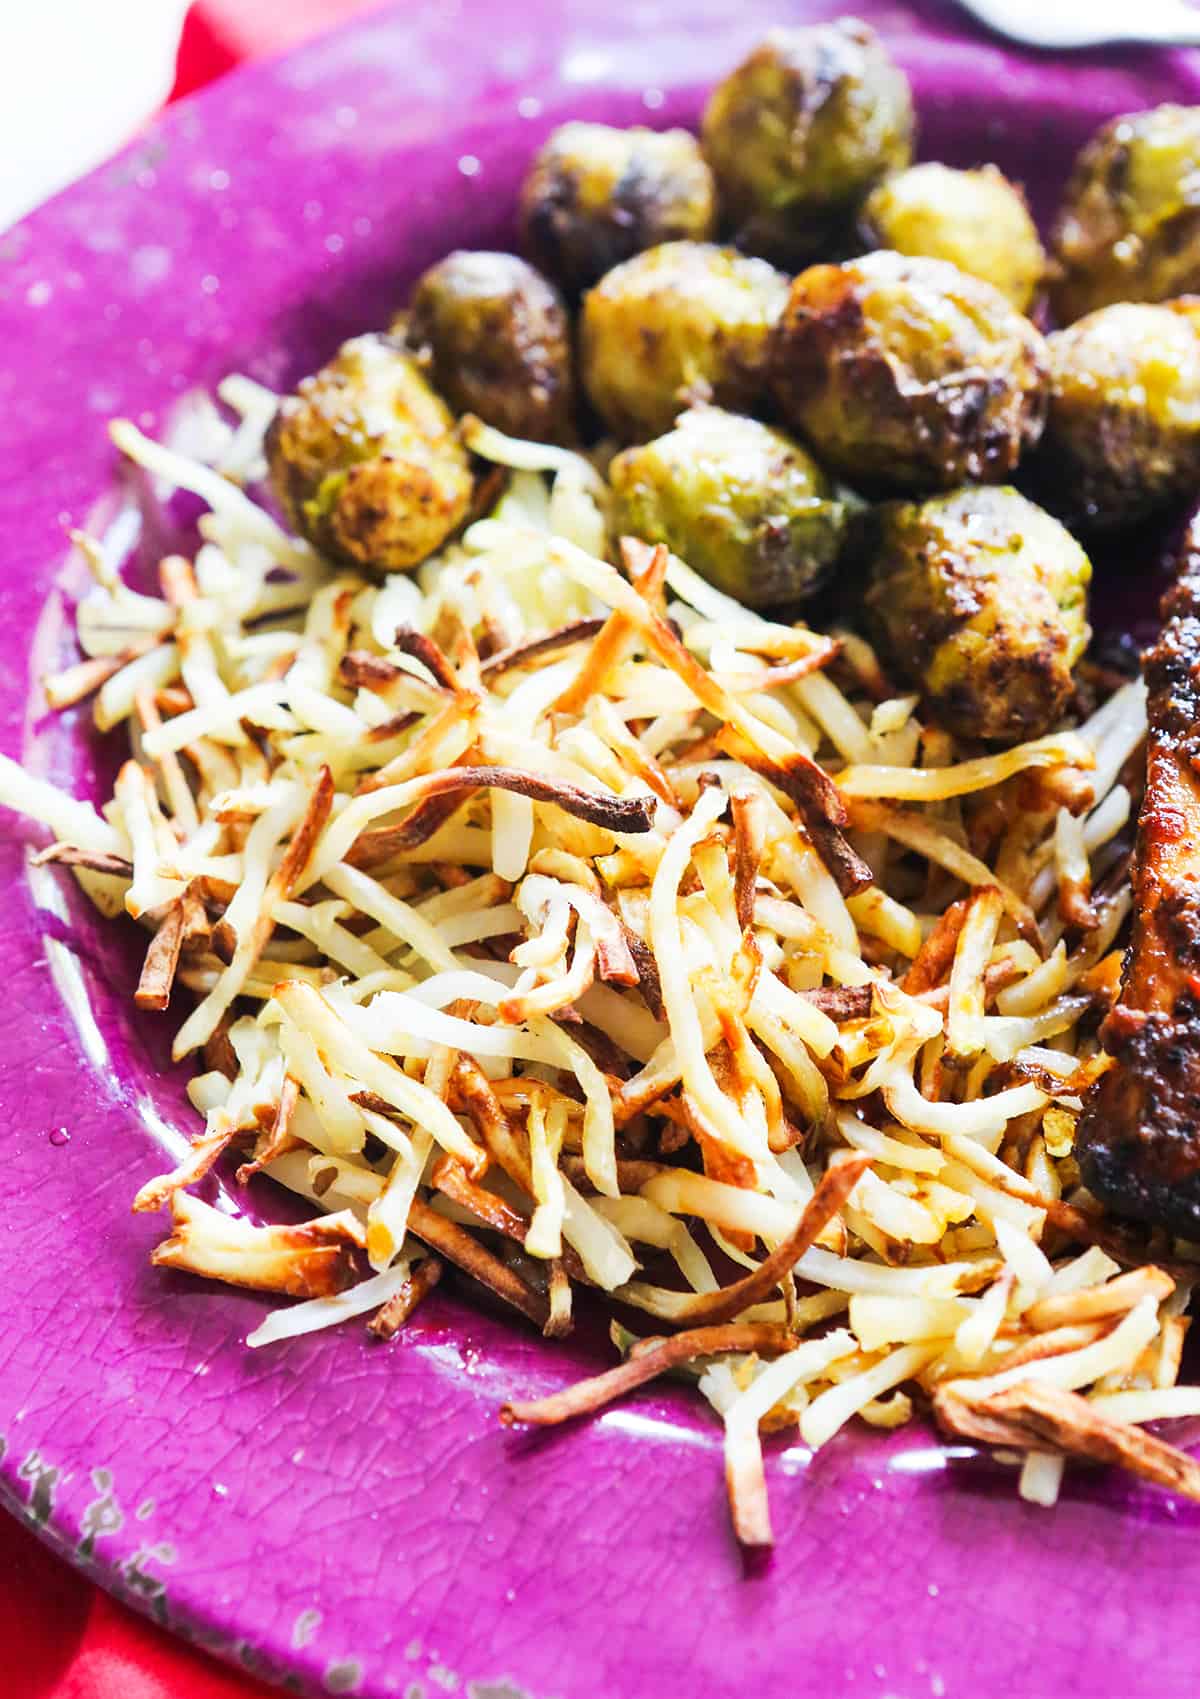 Crispy hash browns on a plate next to Brussels sprouts.